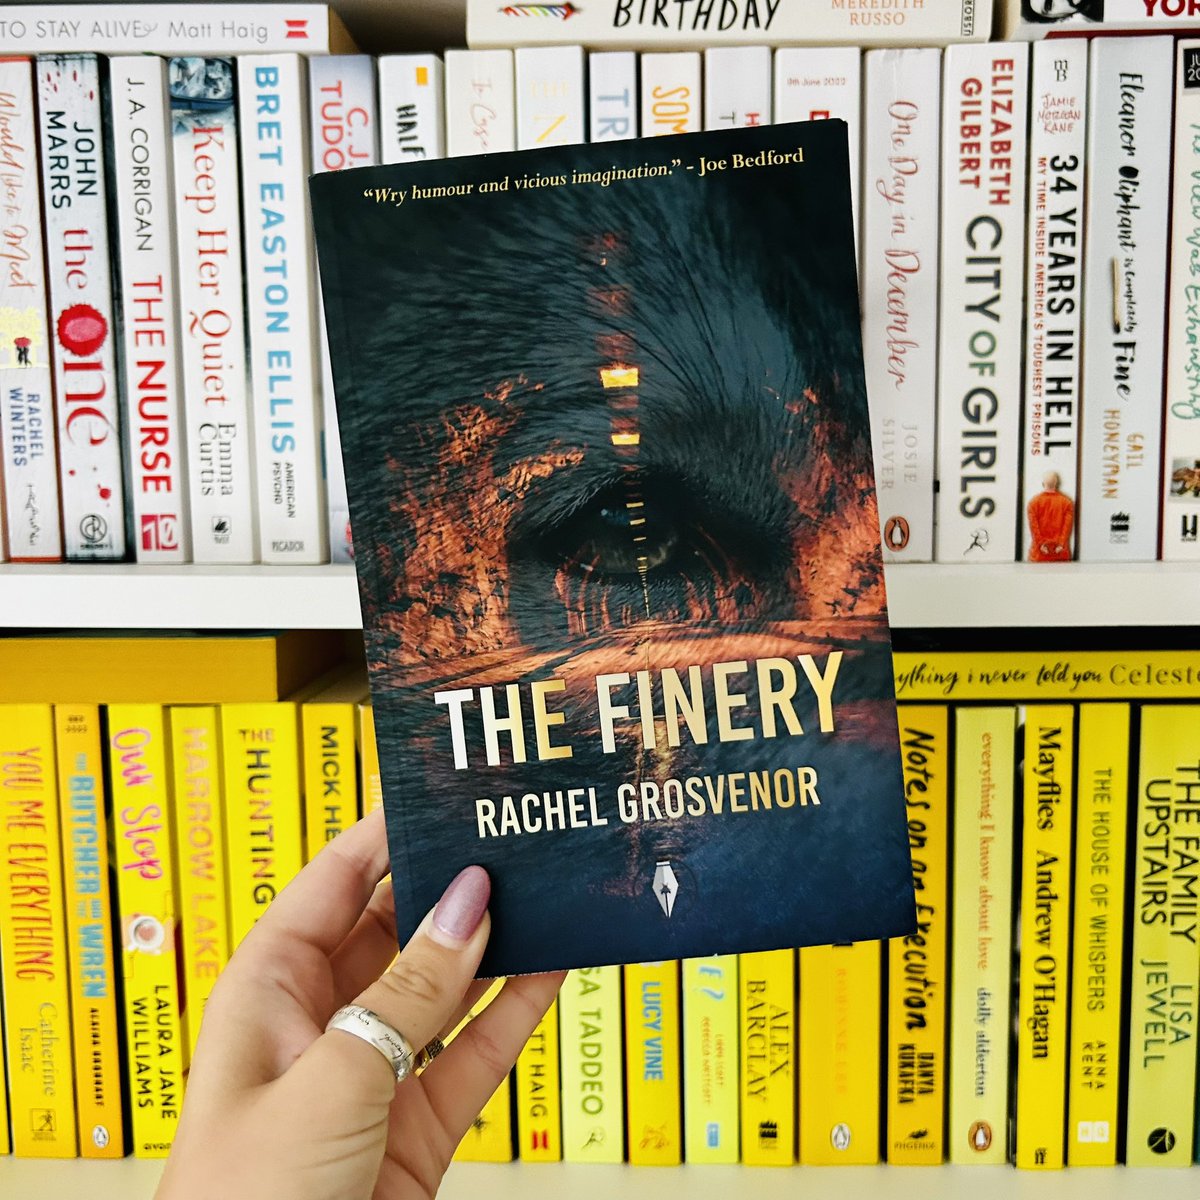 Thank you @fly_press for the copy of #TheFinery by Rachel Grosvenor!

Published 25th August ✨

#BookBlogger #Books #BookTwitter #Reading #Gifted